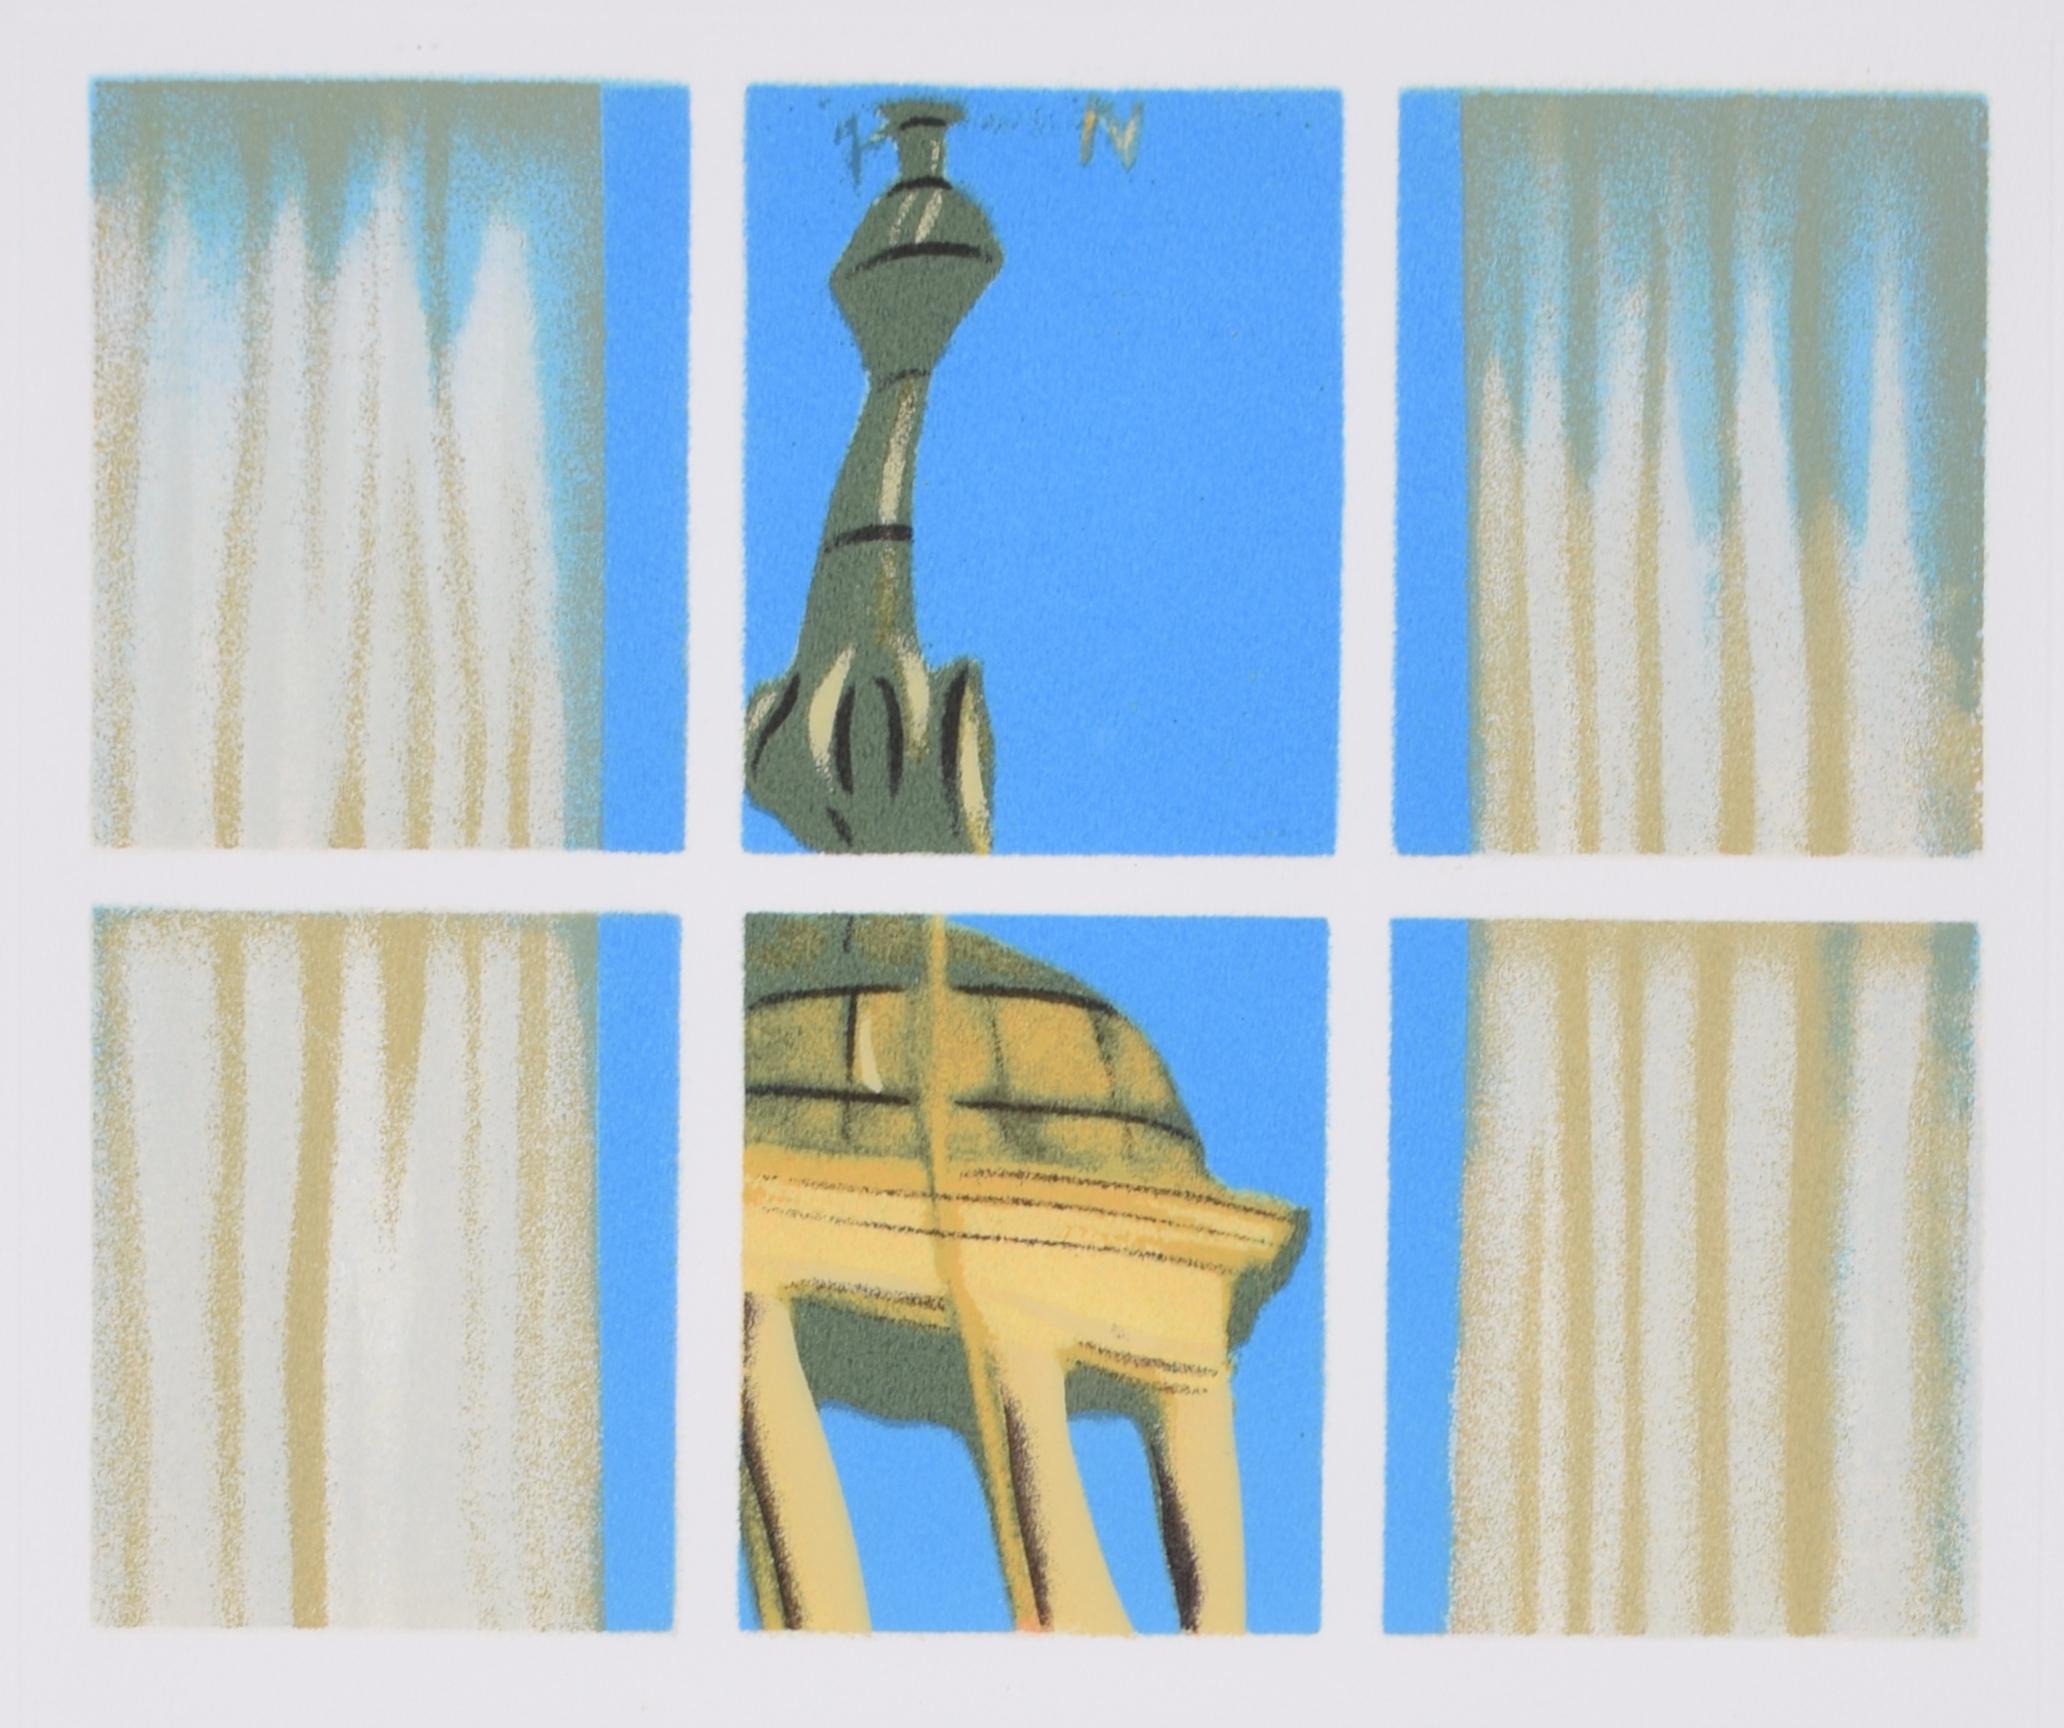 Brendan Neiland (b. 1941) R.A. (Expelled)
Lady Margaret Hall
Screenprint
46 x 27 cm

Signed, titled,  and numbered 42/175 in pencil.

A screenprint of the cupola atop Lady Margaret Hall's Talbot Building. Reflected architecture is one of Neiland’s